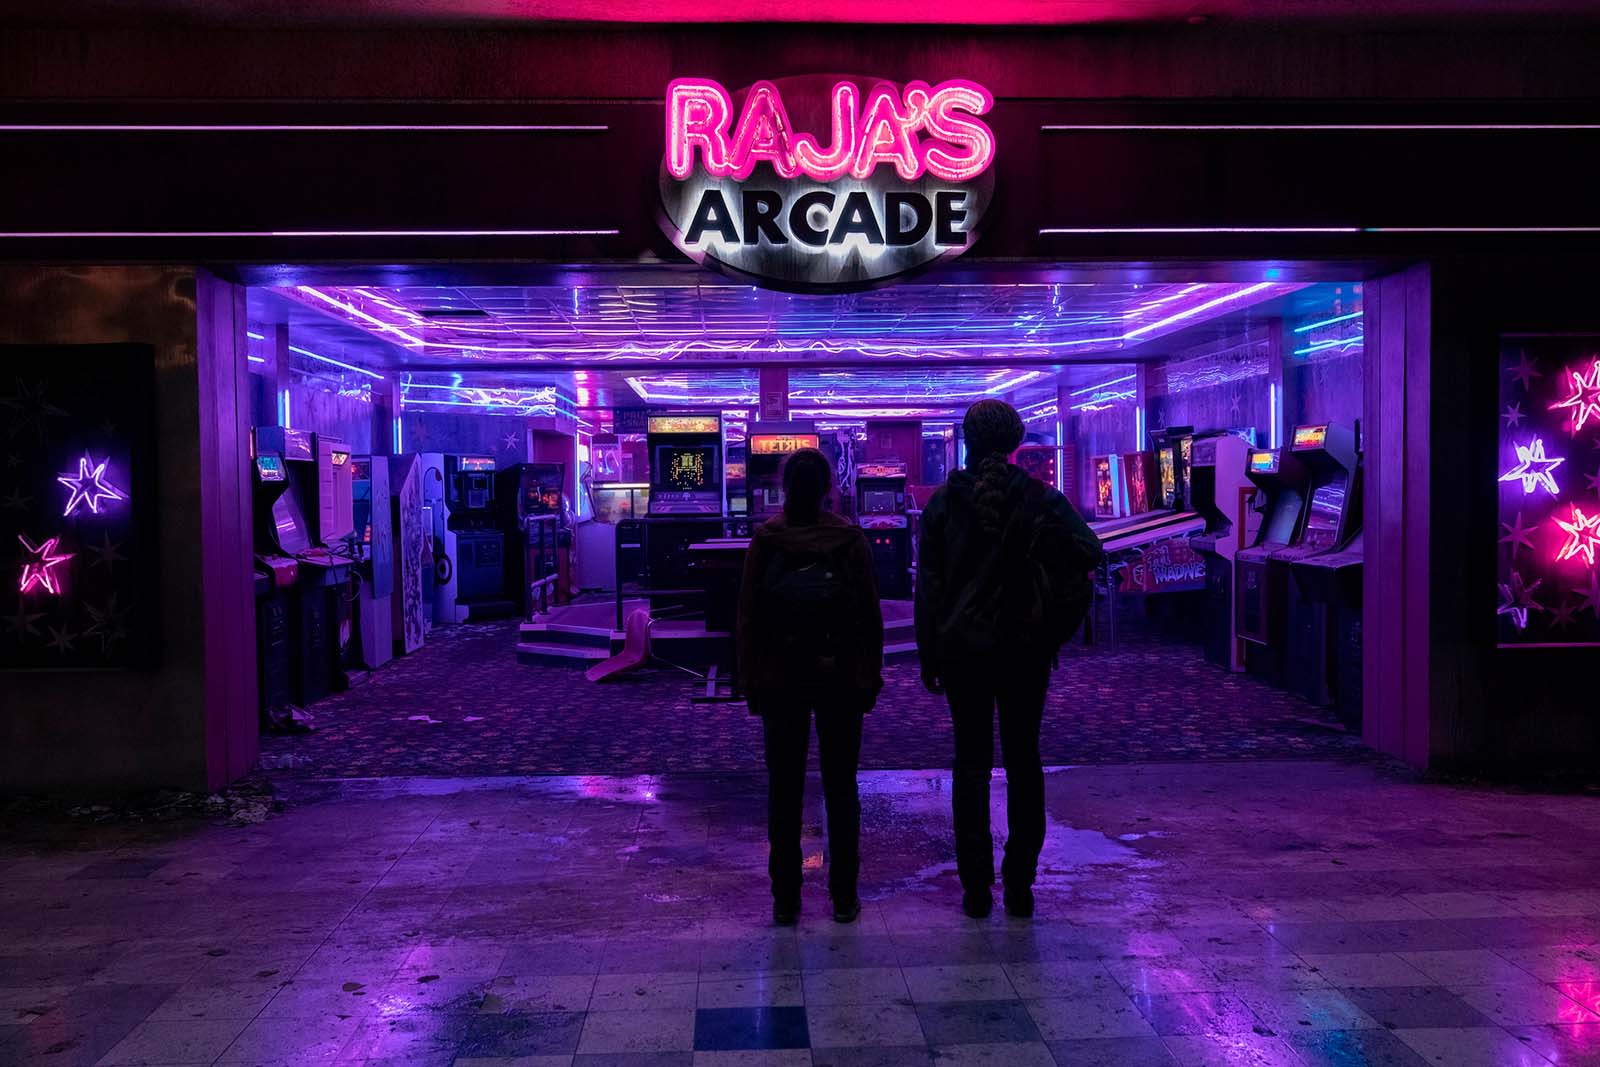 “It’s the most beautiful thing I’ve ever seen.” Ellie marvels at a neon-drenched arcade. Image © HBO